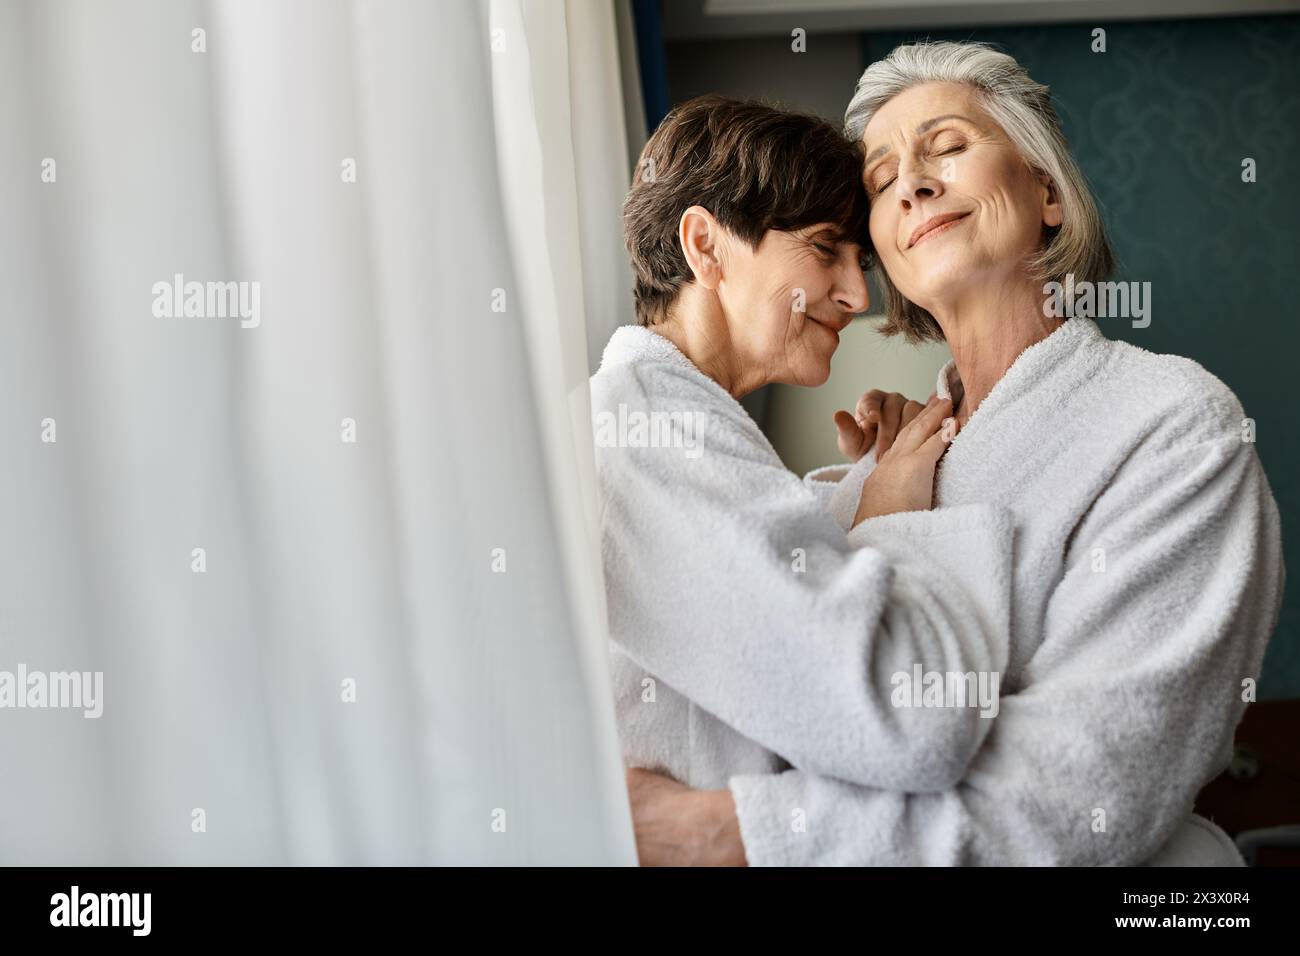 A senior lesbian couple, one in a bathrobe, hugging affectionately. Stock Photo